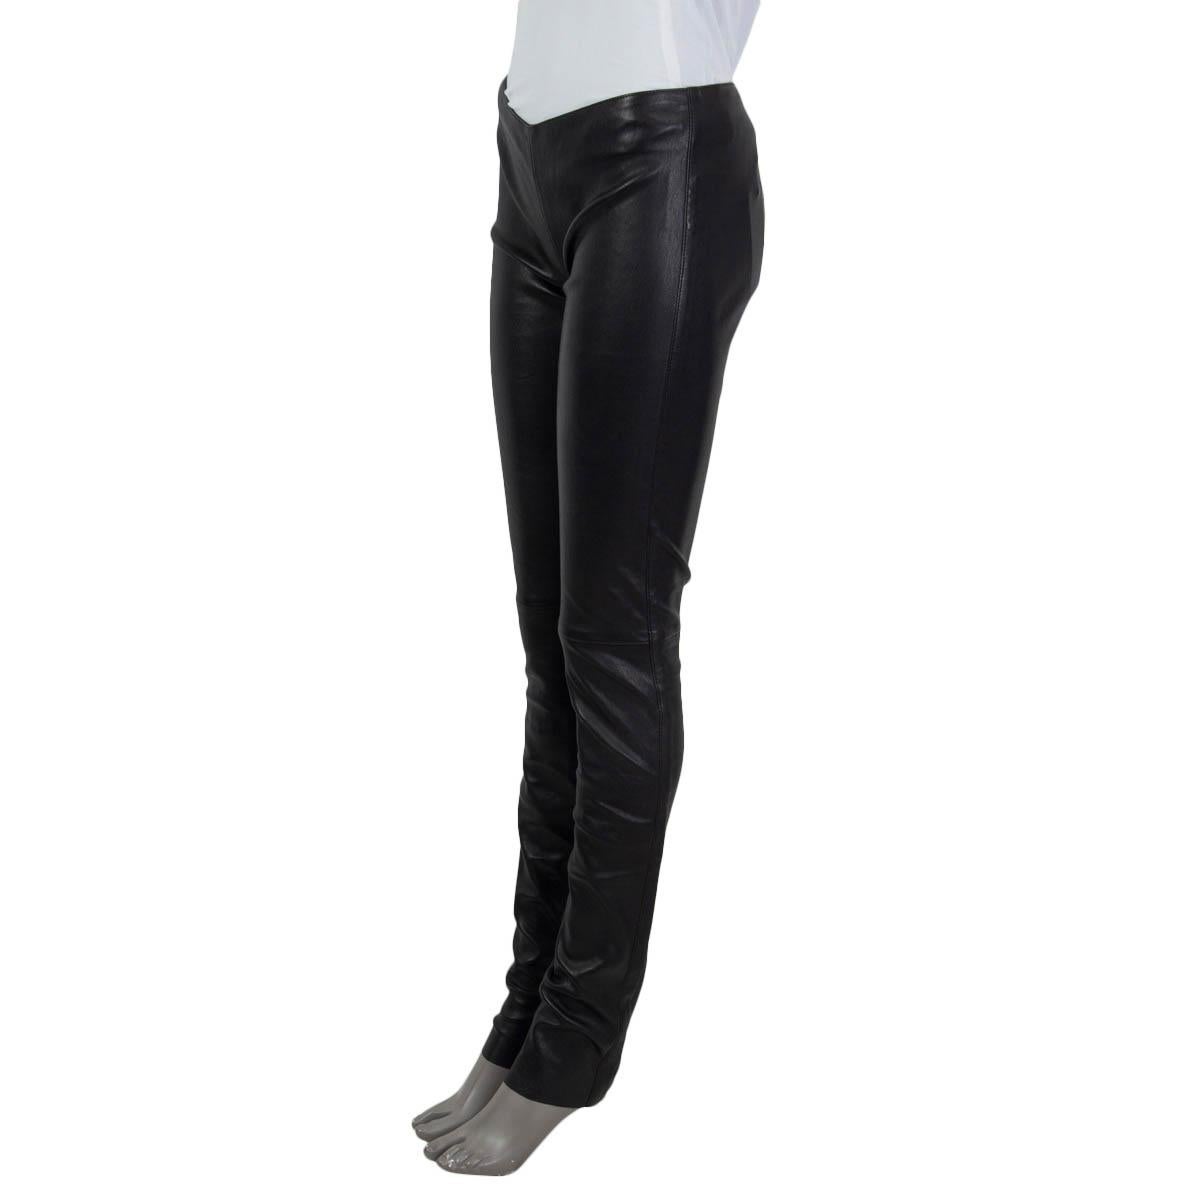 100% authentic Jitrois slim-fit leggings in black lambskin (100%). Open with a zipper and a hook on the back. Lined in black cotton (97%) and spandex (3%). Have been worn and are in excellent condition.

Measurements
Tag Size	38
Size	S
Waist	70cm